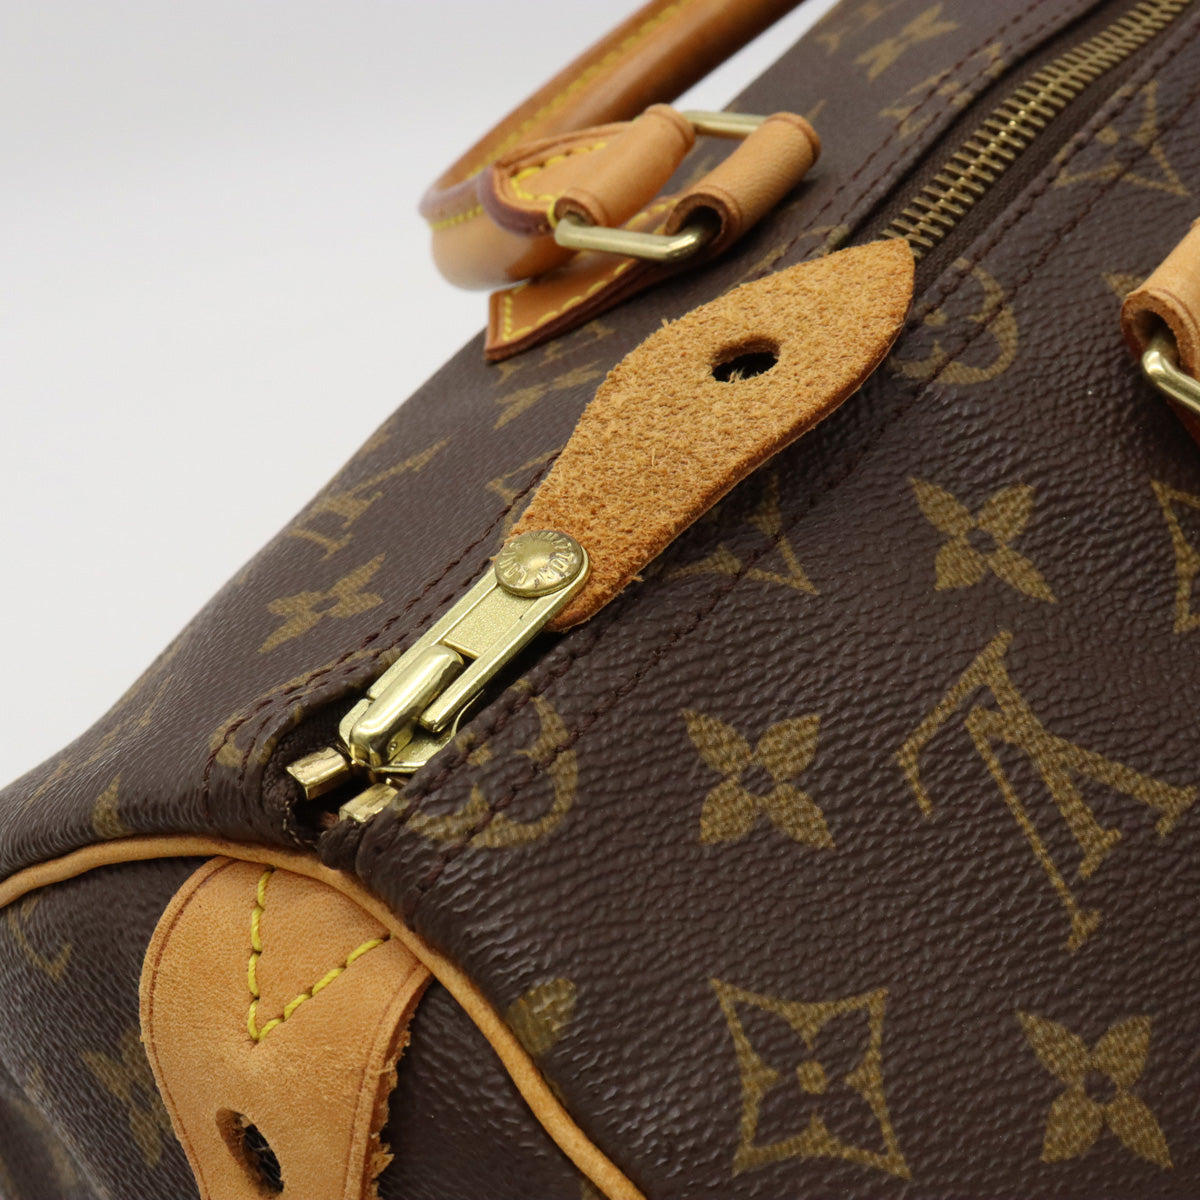 Louis Vuitton, Bags, Louis Vuitton Speedy 35 In Very Good Condition See  Pictures And Description